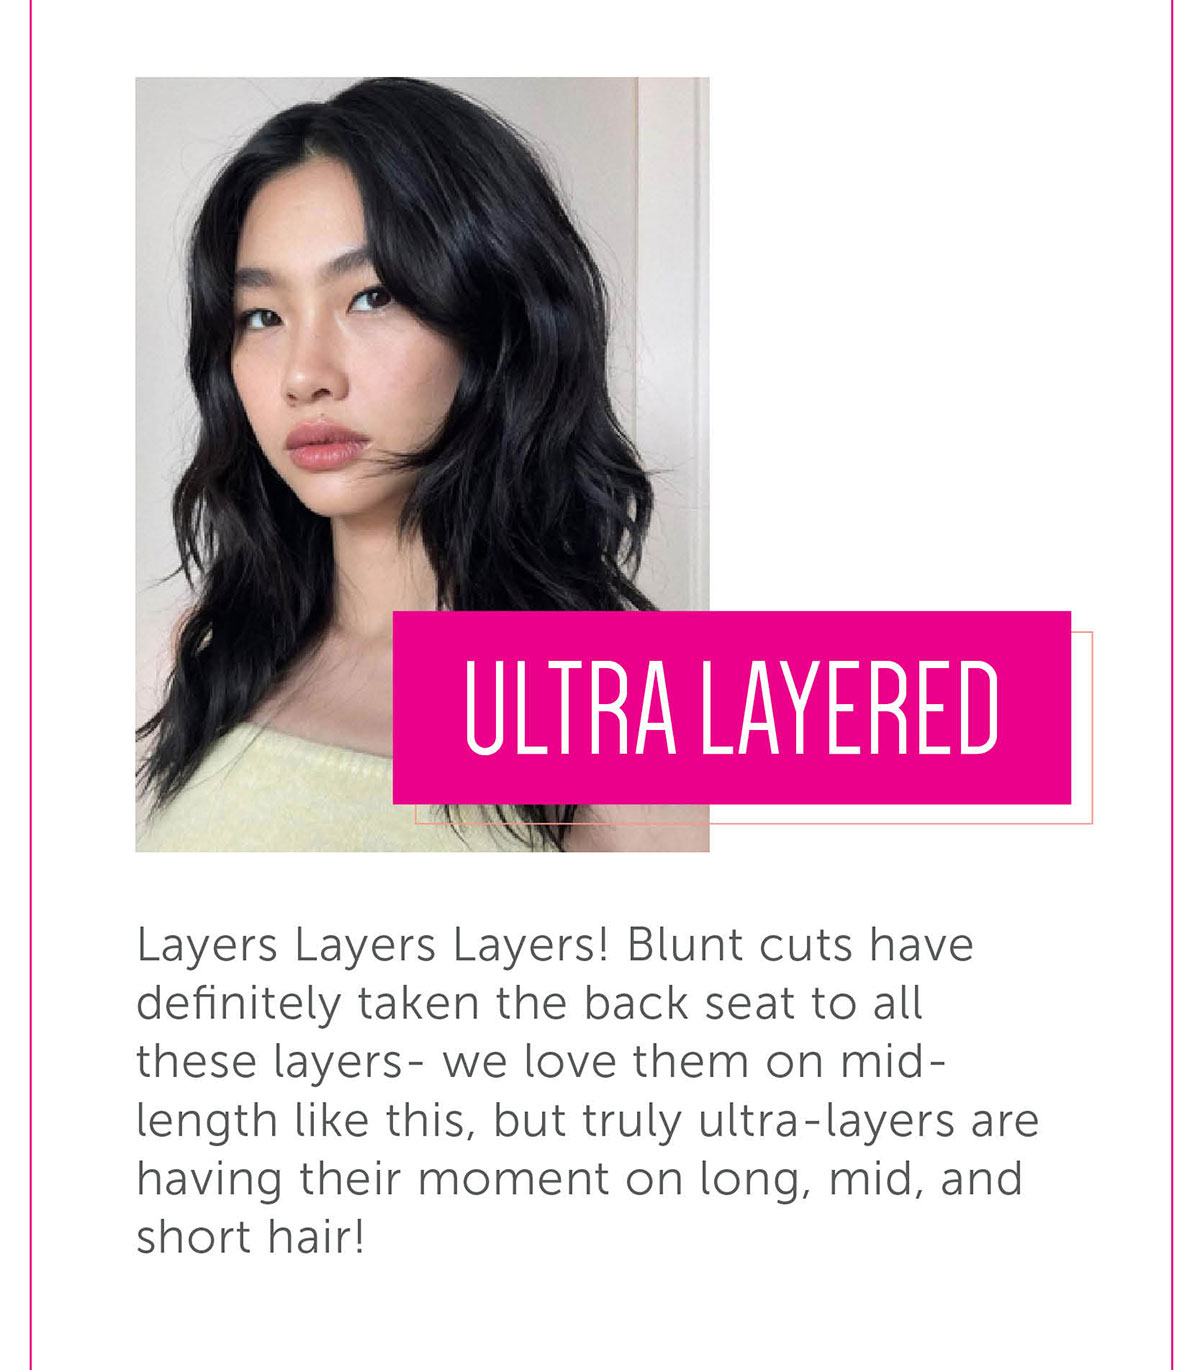 Ultra layered Layers Layers Layers! Blunt cuts have definitely taken the back seat to all these layers- we love them on mid-length like this, but truly ultra-layers are having their moment on long, mid, and short hair!